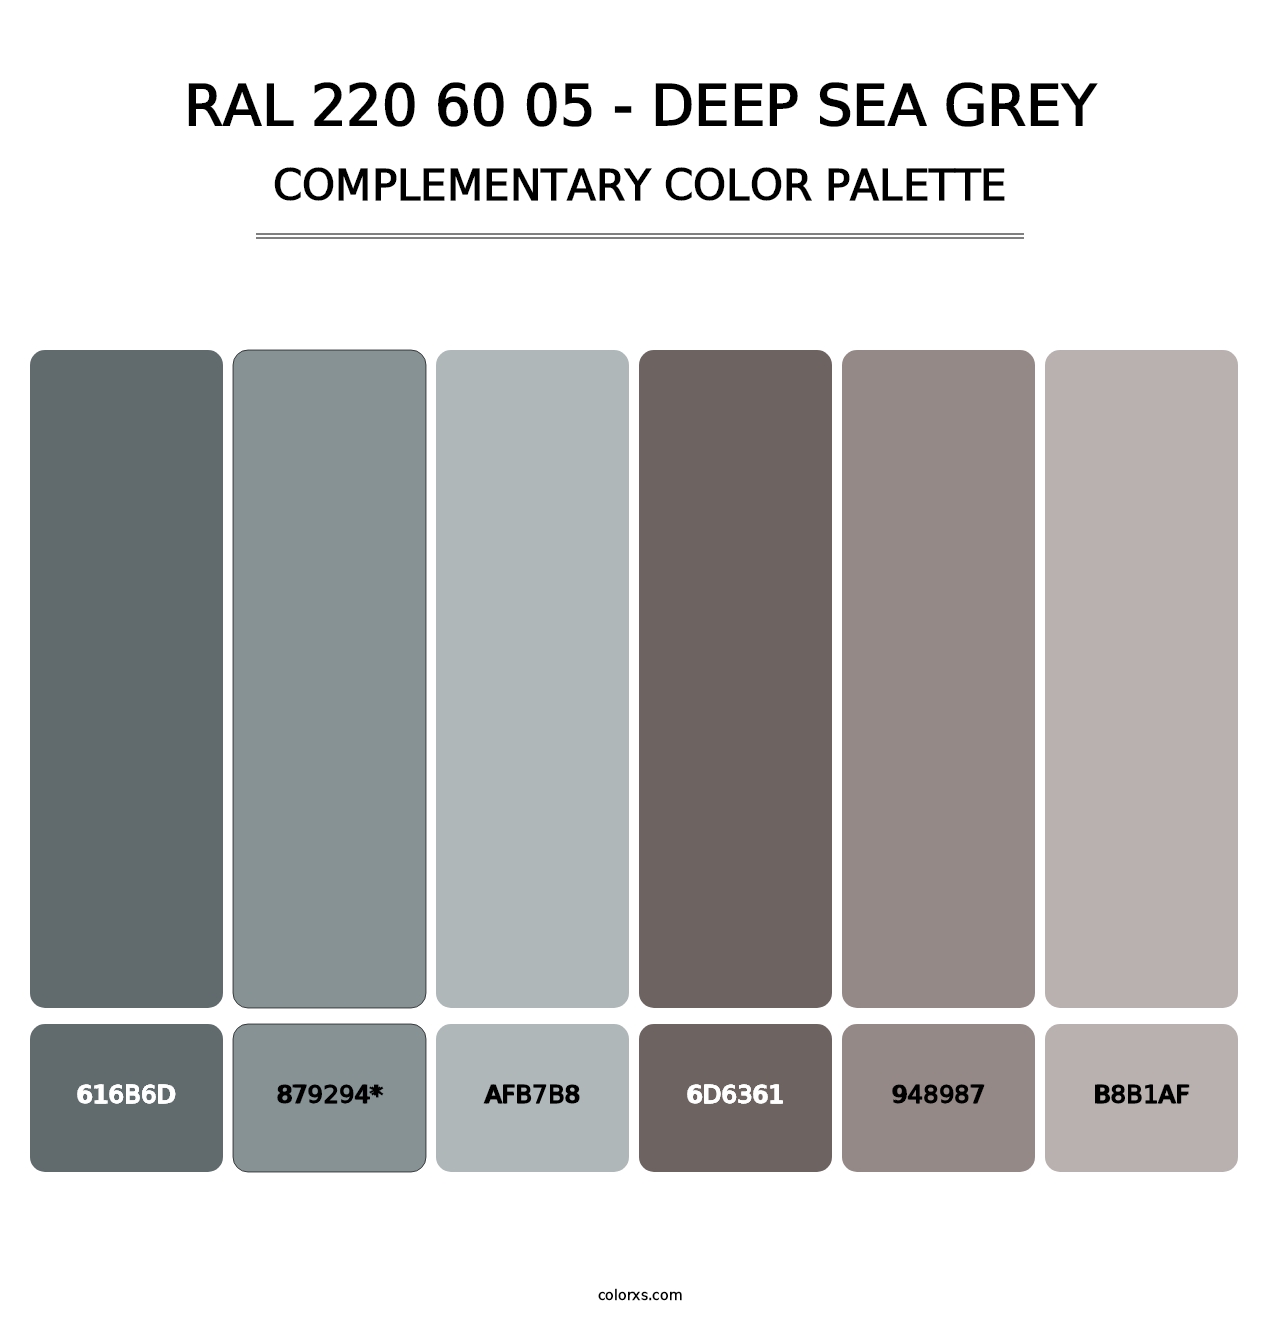 RAL 220 60 05 - Deep Sea Grey - Complementary Color Palette